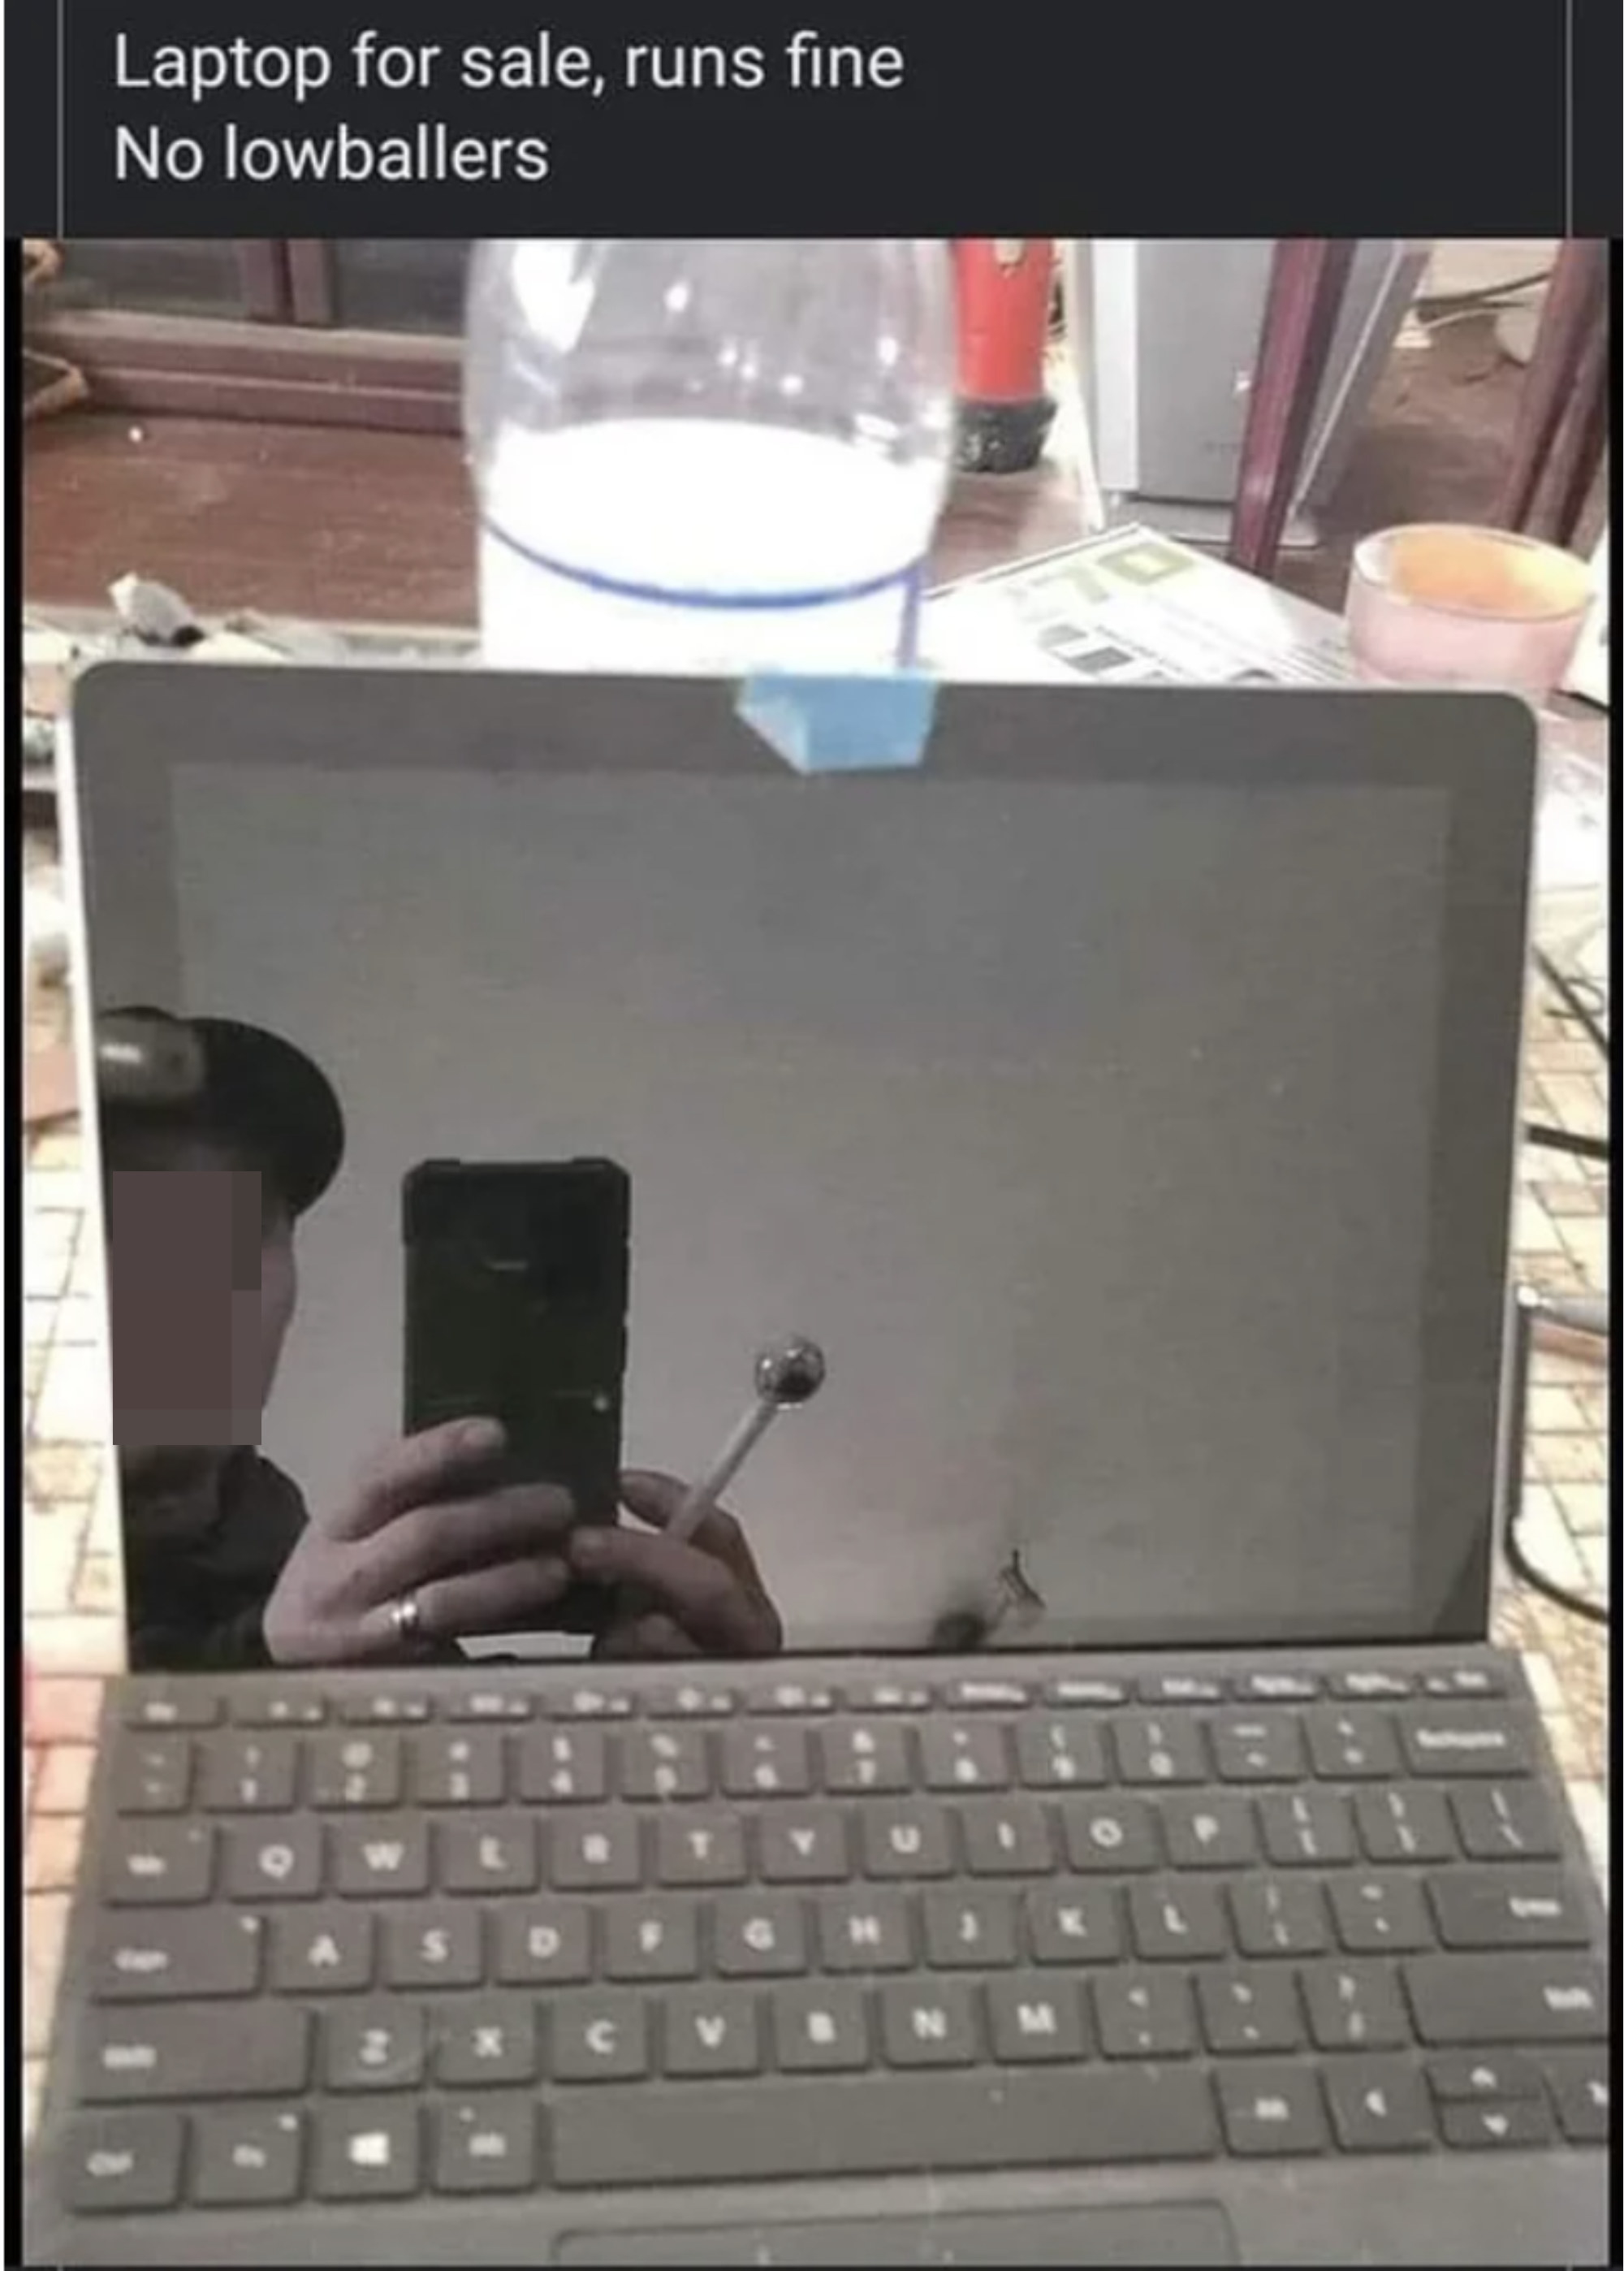 phone and crack pipe in the laptop reflection